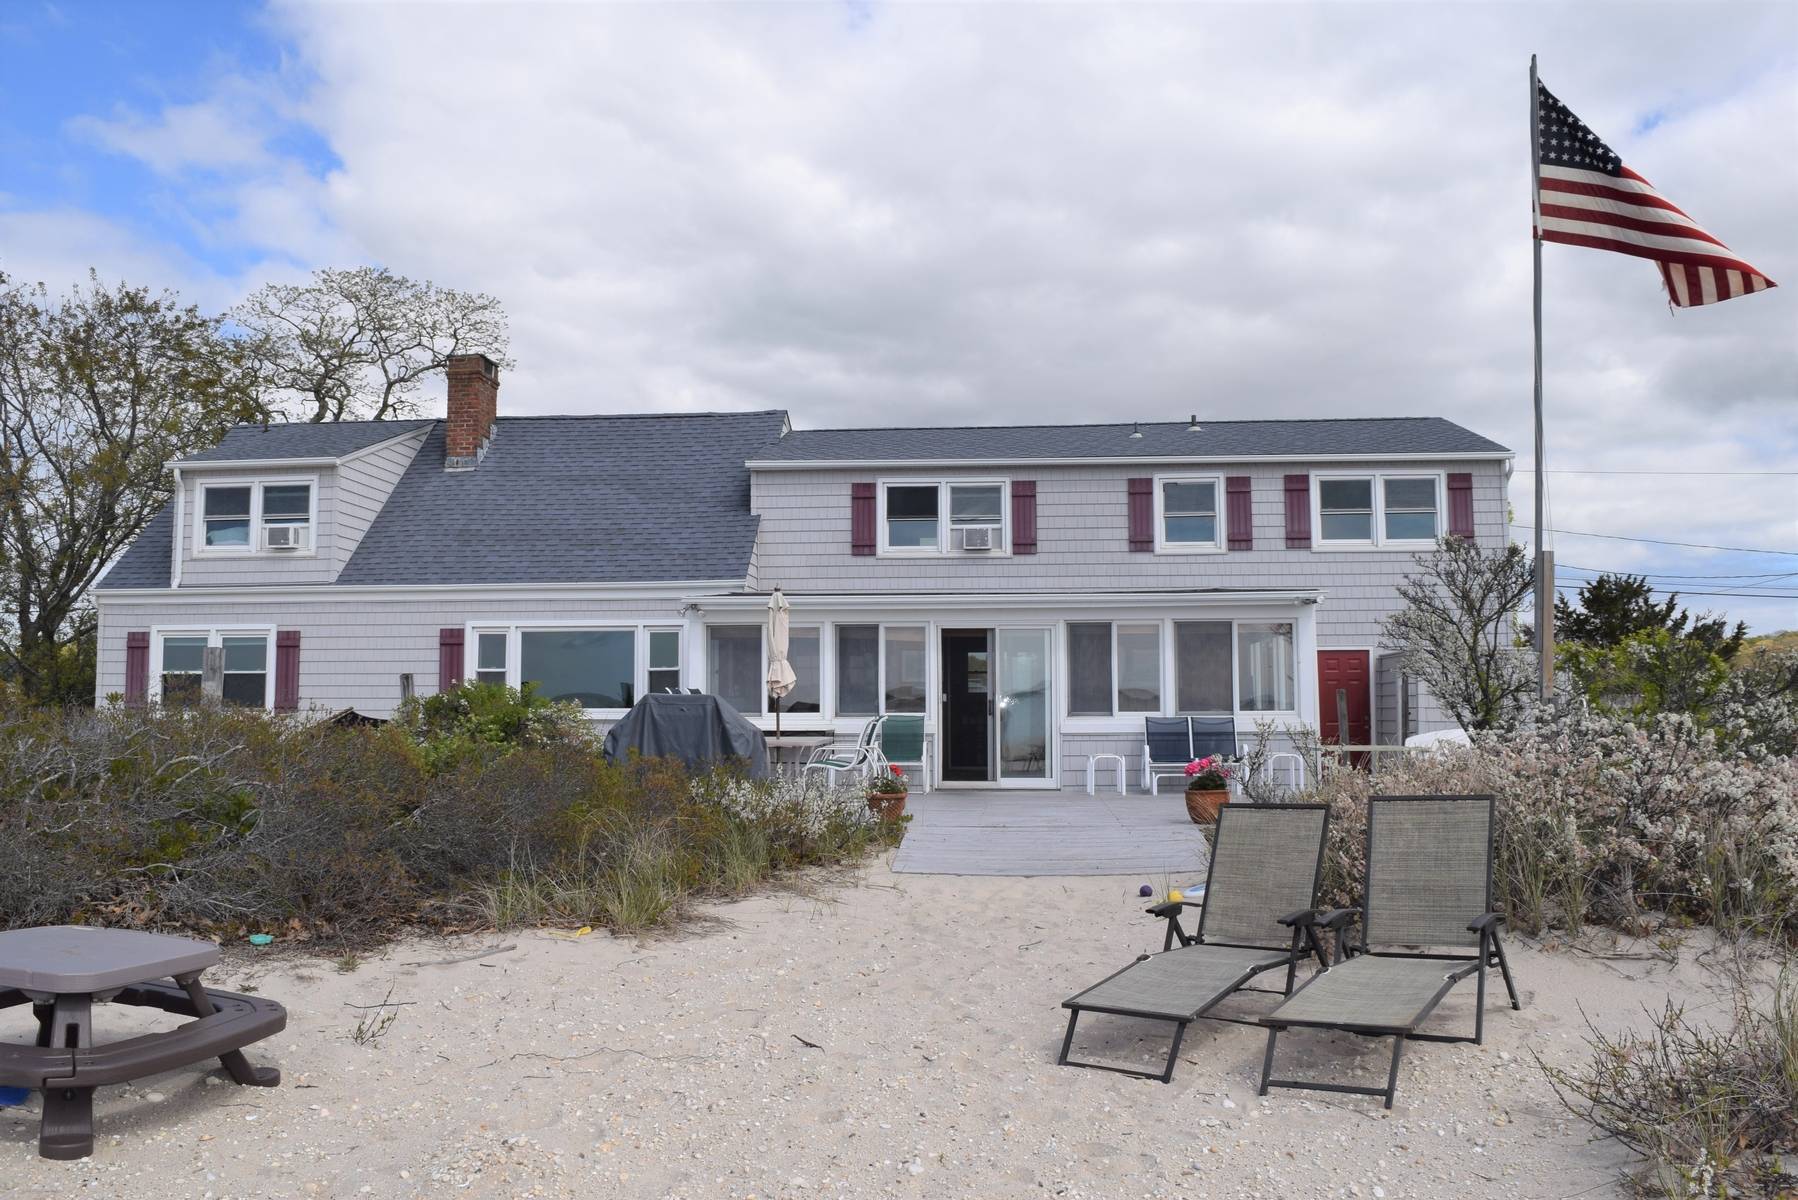 BAY FRONT SUMMER RENTAL IN SOUTHAMPTON SHORES